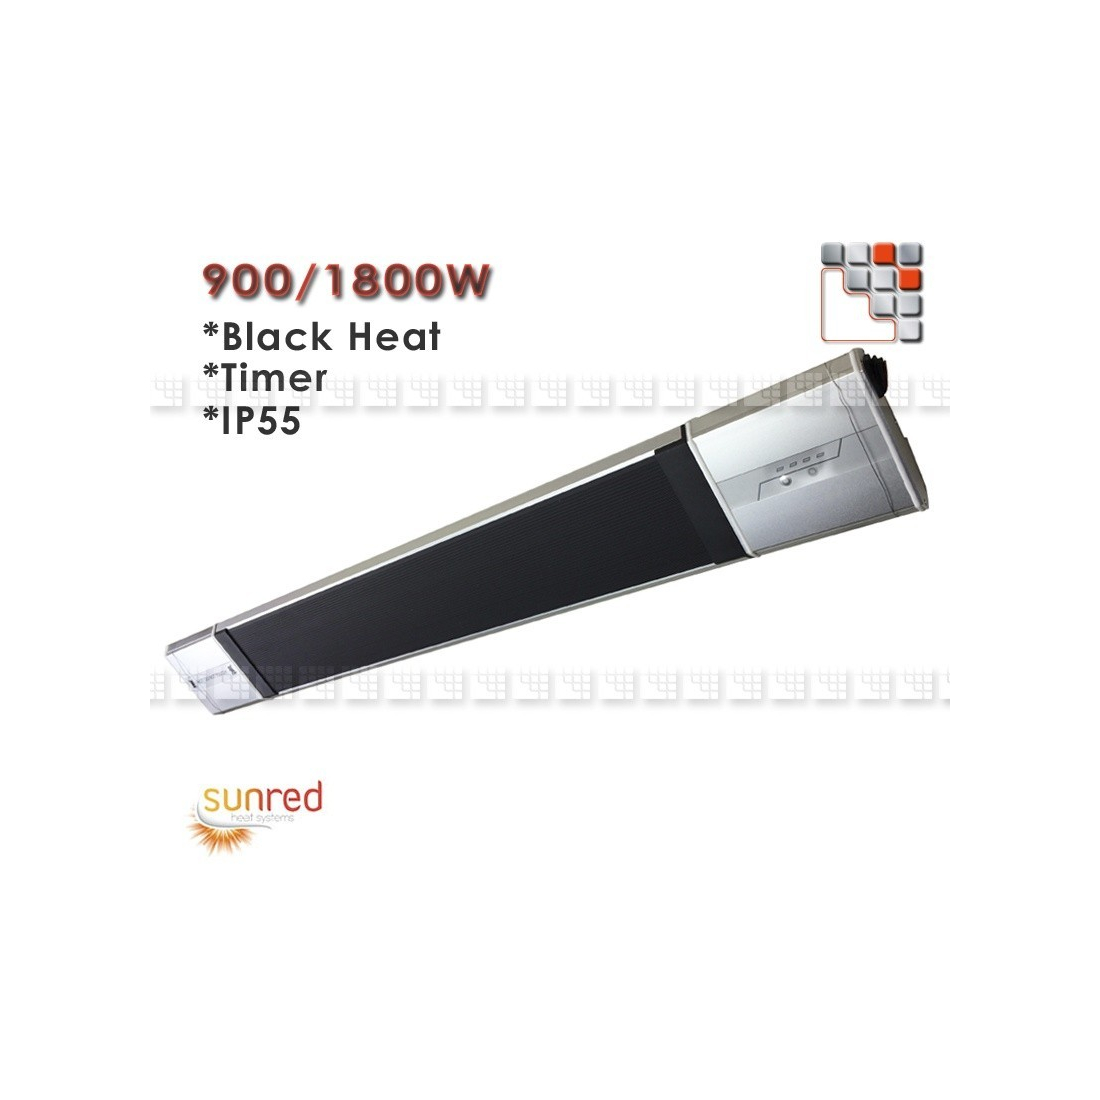 Black Heat 1800W Infrared Heater O53-HS15 OutTrade Patio Heater